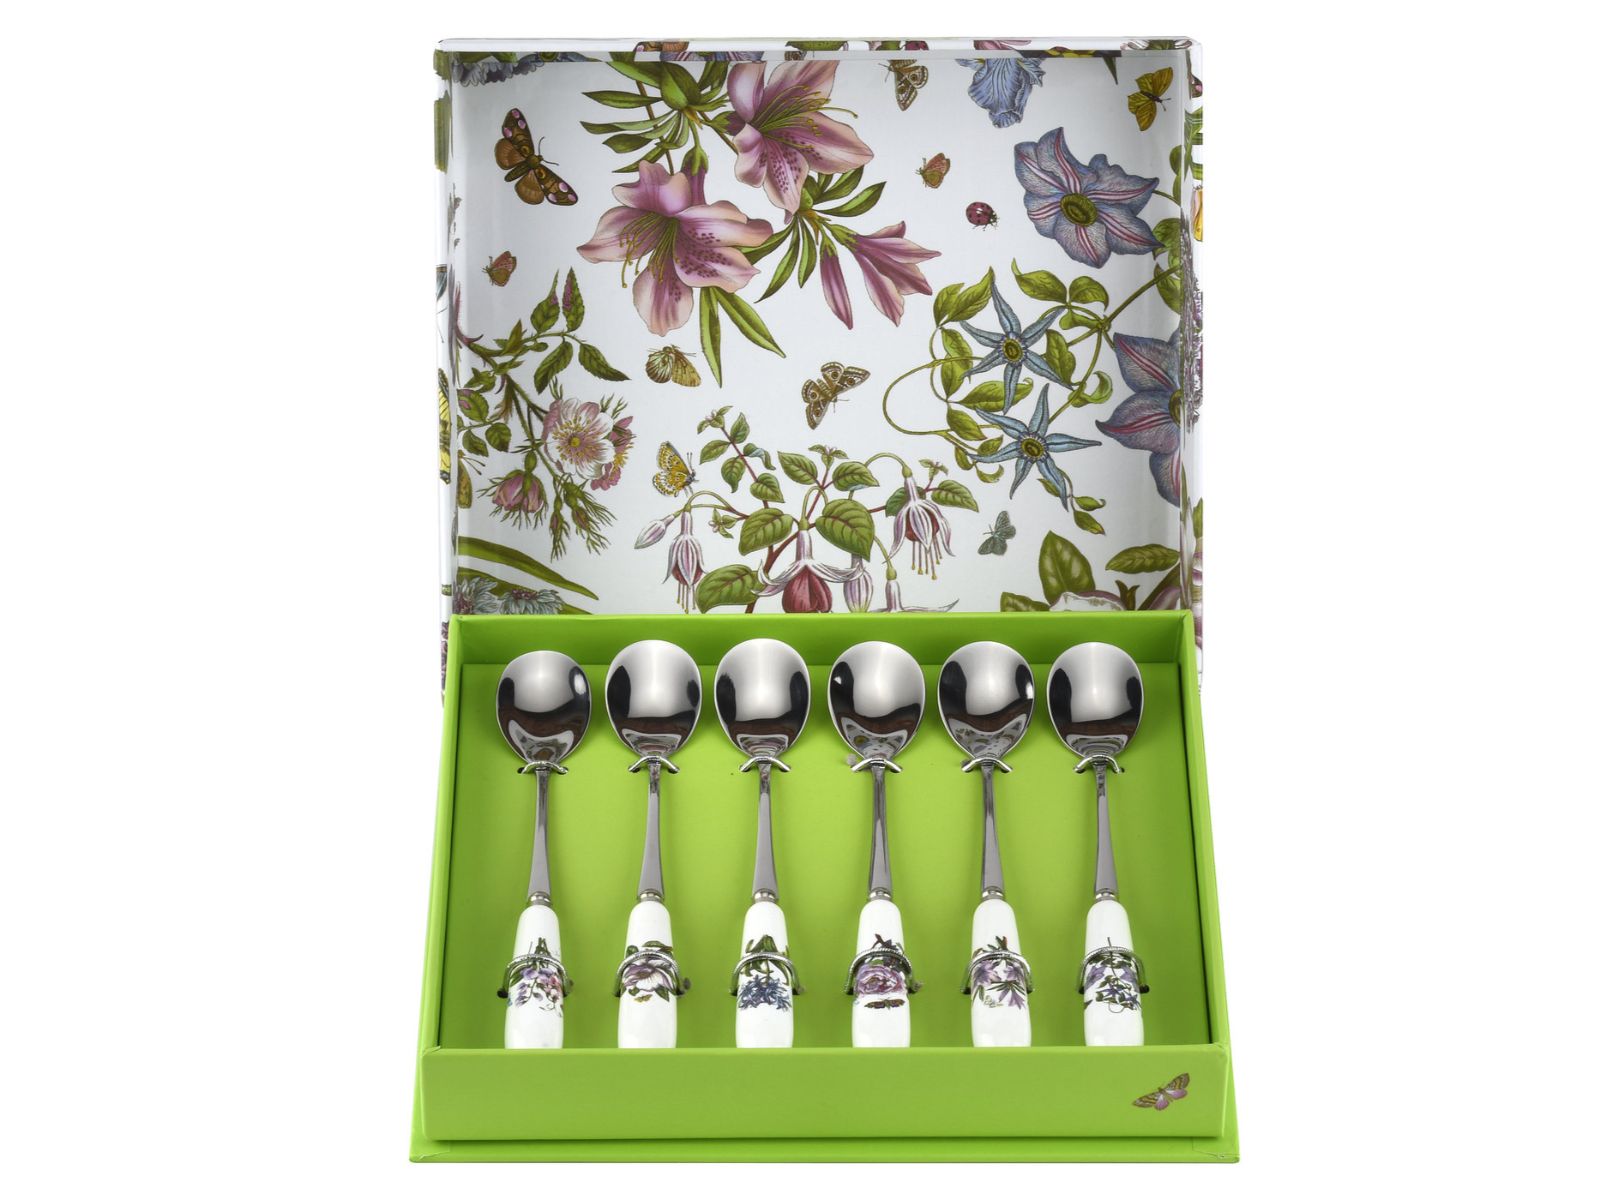 A set of six tea spoons with porcelain handles, each with a different pink or purple floral design on